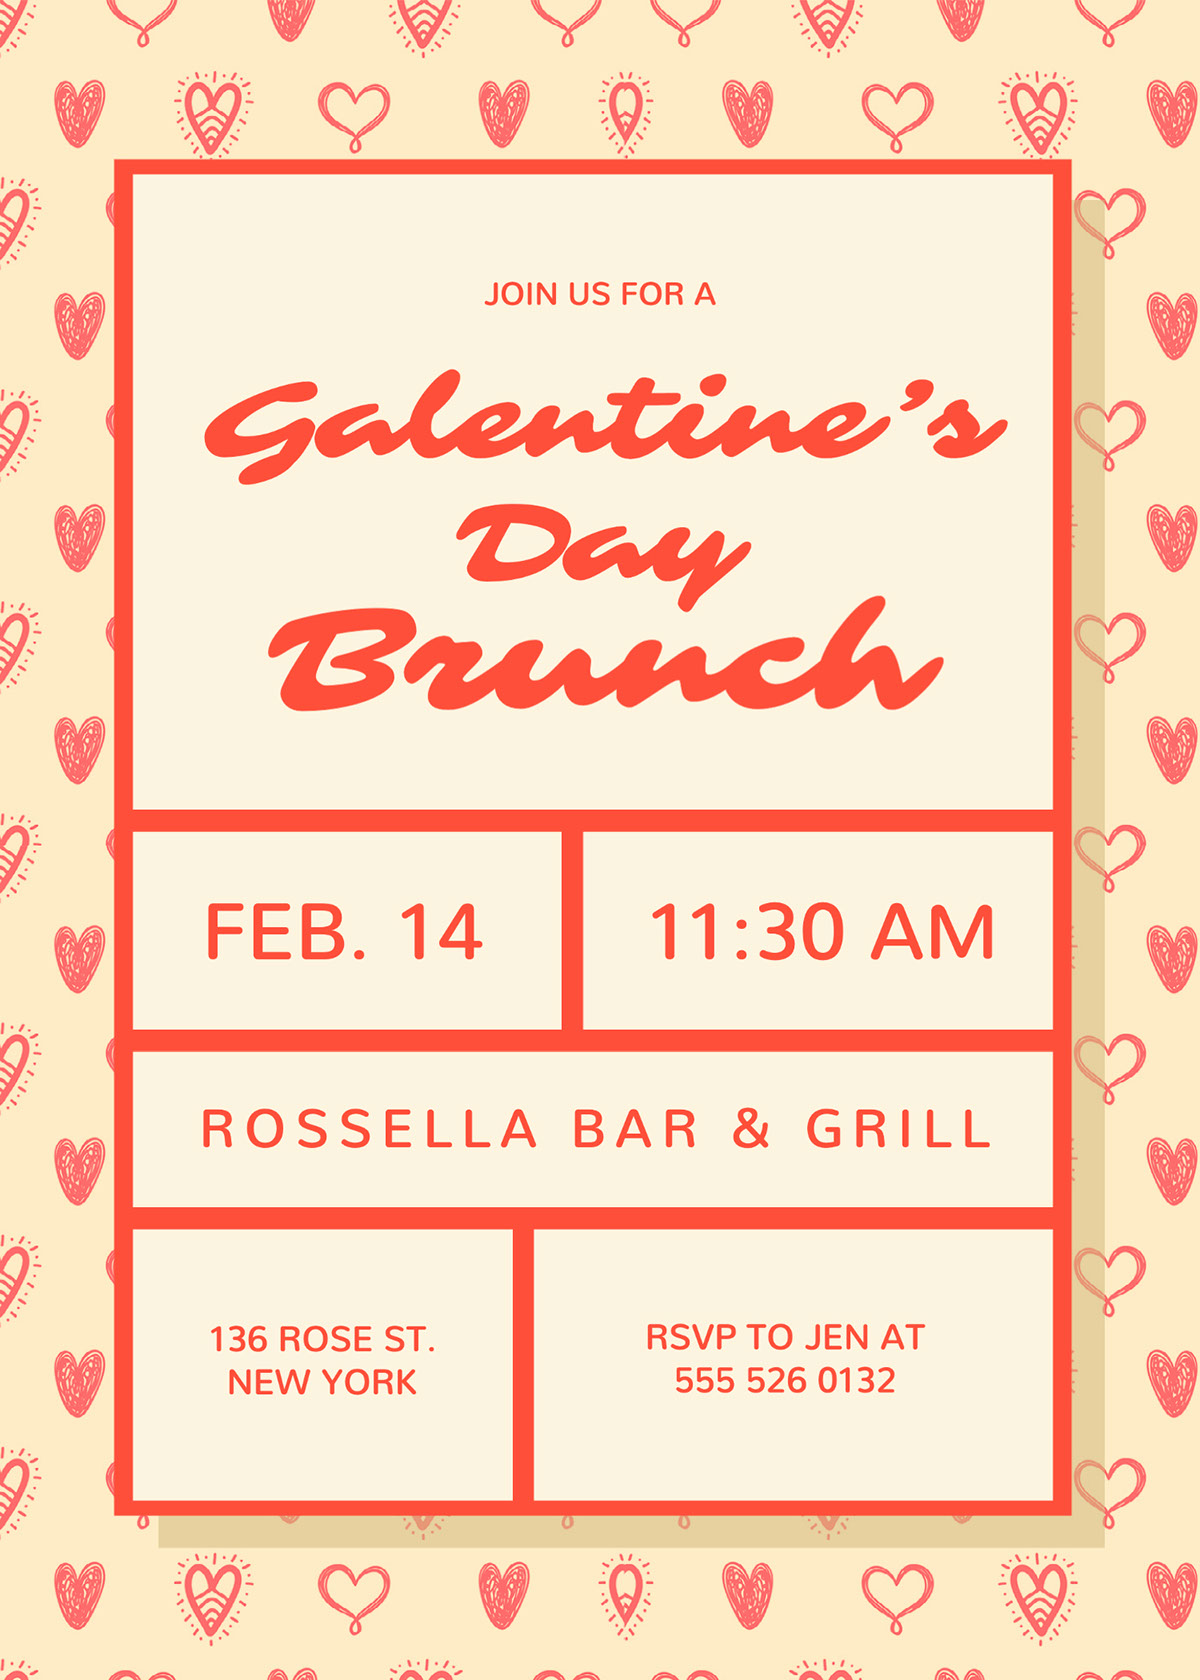 Brunch Brunch Galentine’s Day 11:30 AM FEB. 14 Rossella Bar & Grill 136 ROSE ST. NEW YORK RSVP TO JEN AT 555 526 0132 Join us for a